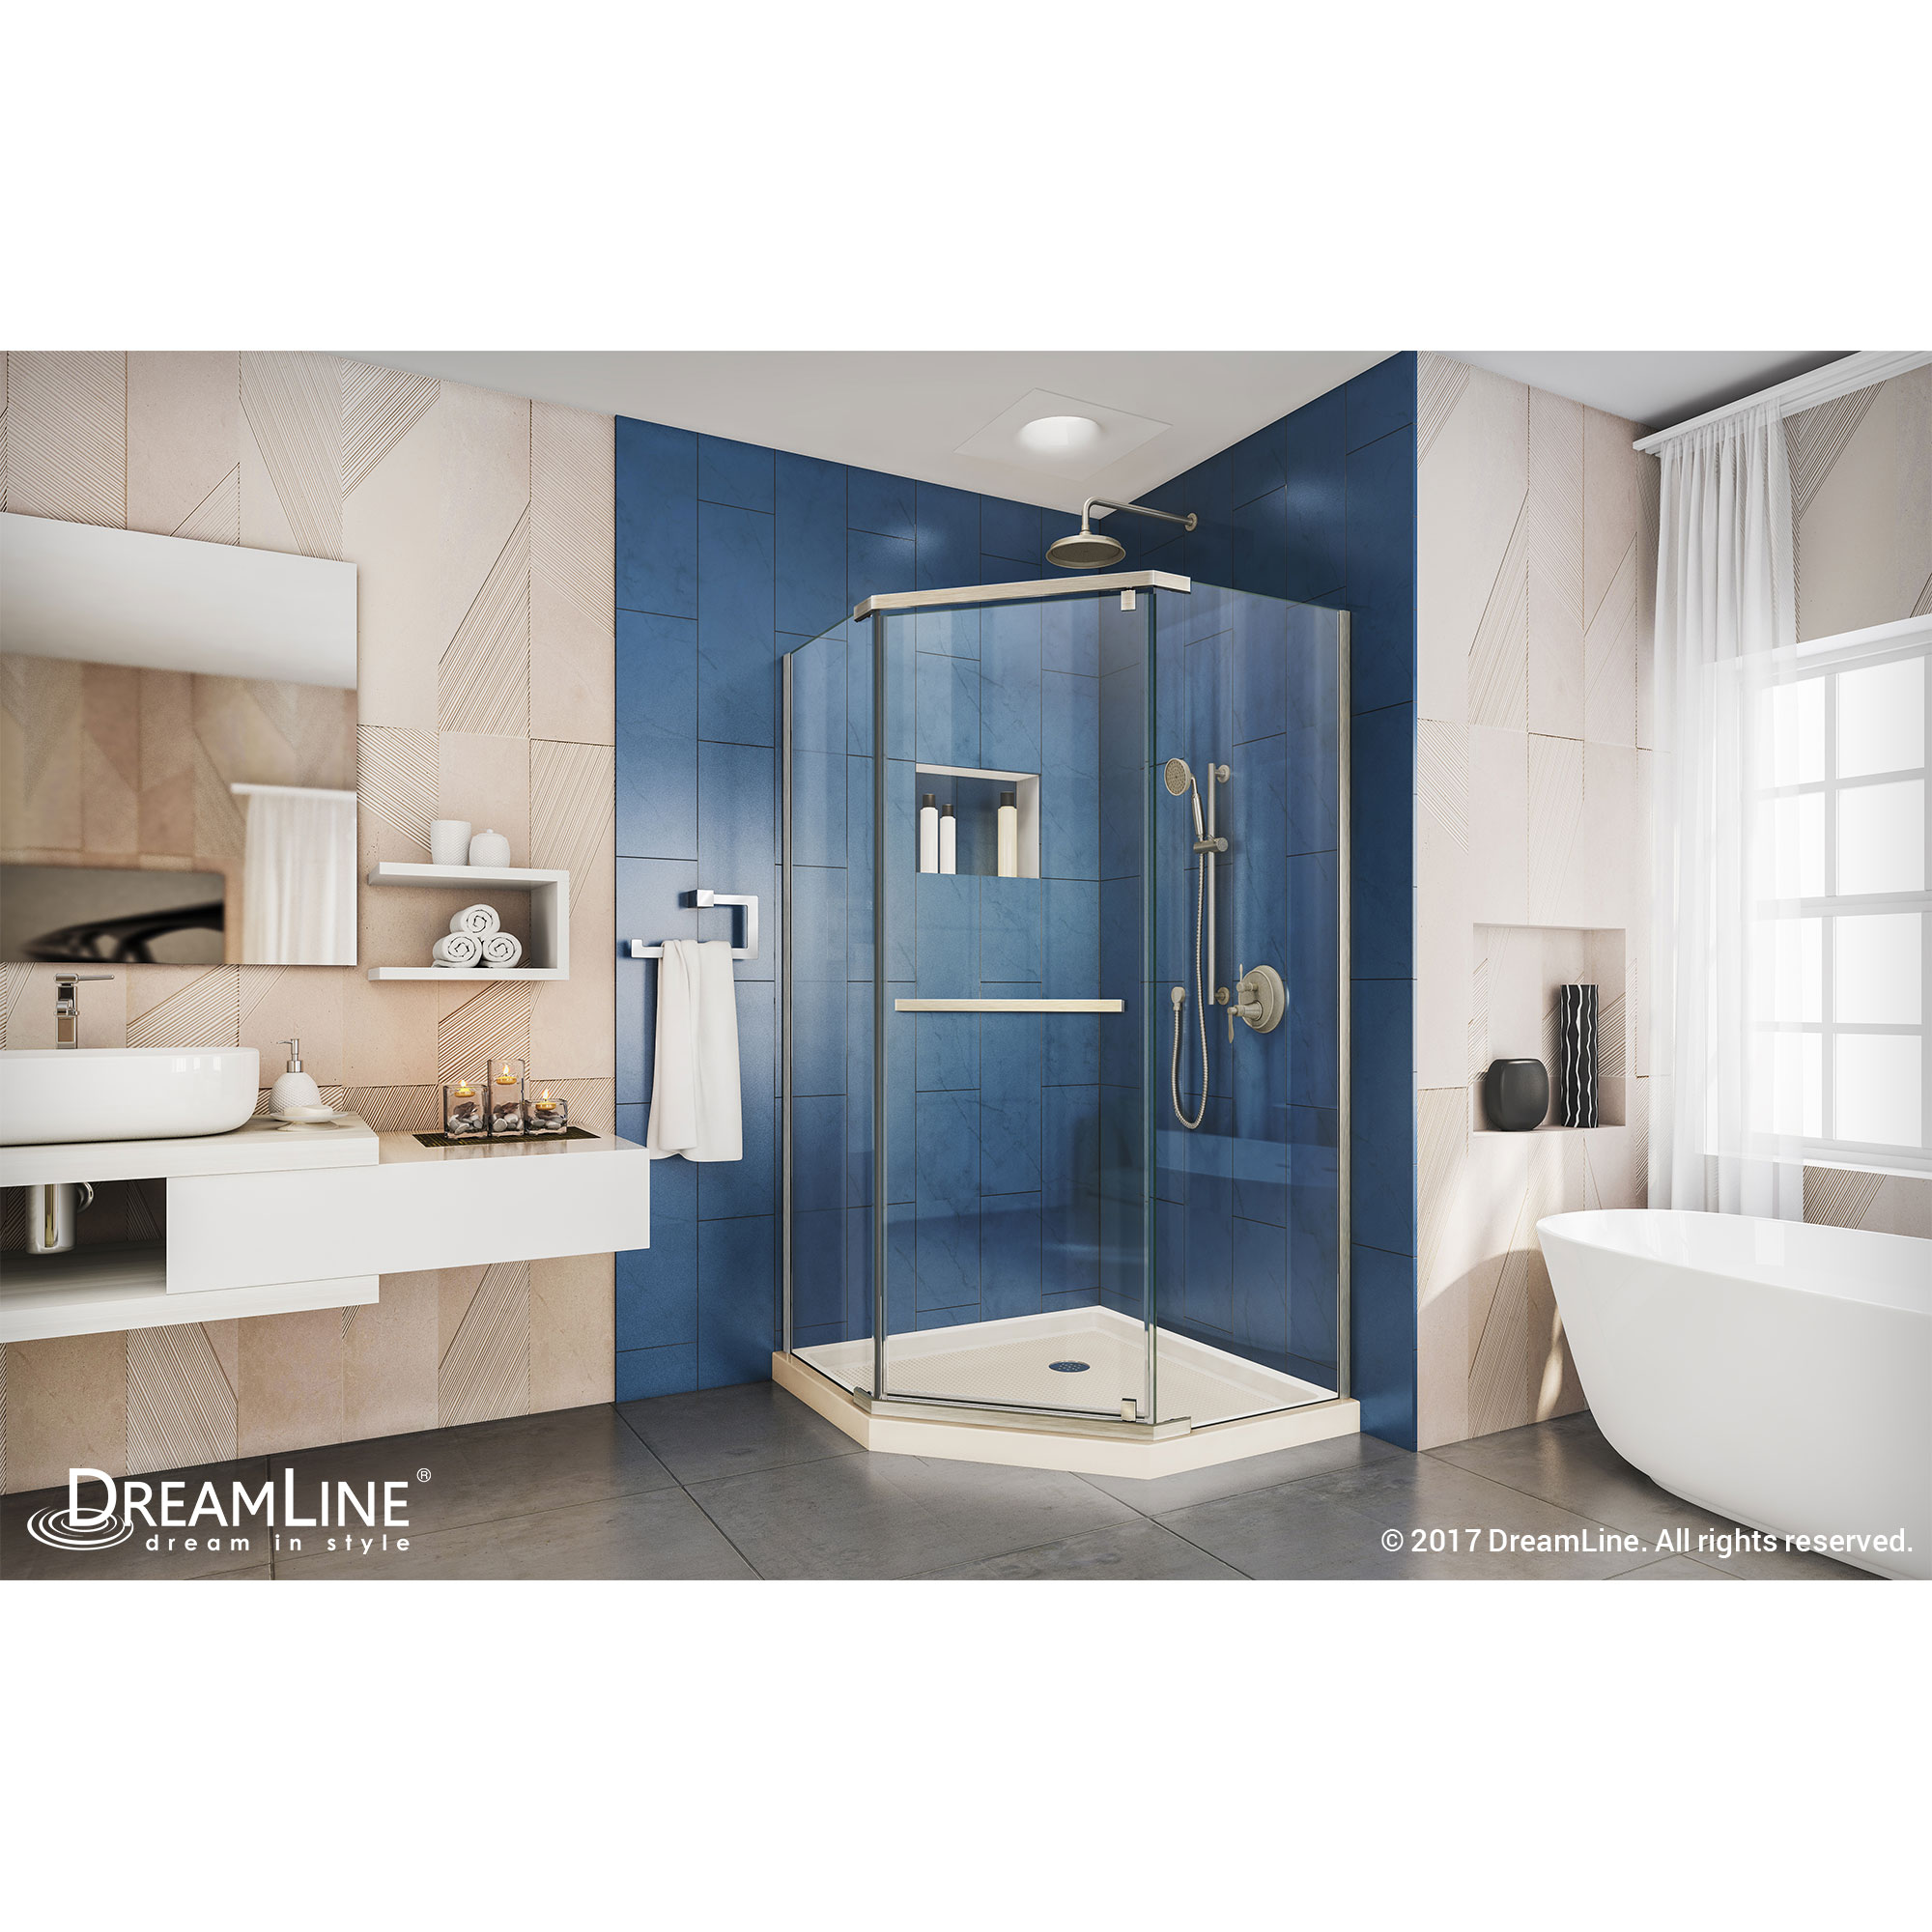 DreamLine Prism 36 in. D x 36 in. W x 74 3/4 H Pivot Shower Enclosure in Brushed Nickel and Corner Drain Biscuit Base Kit